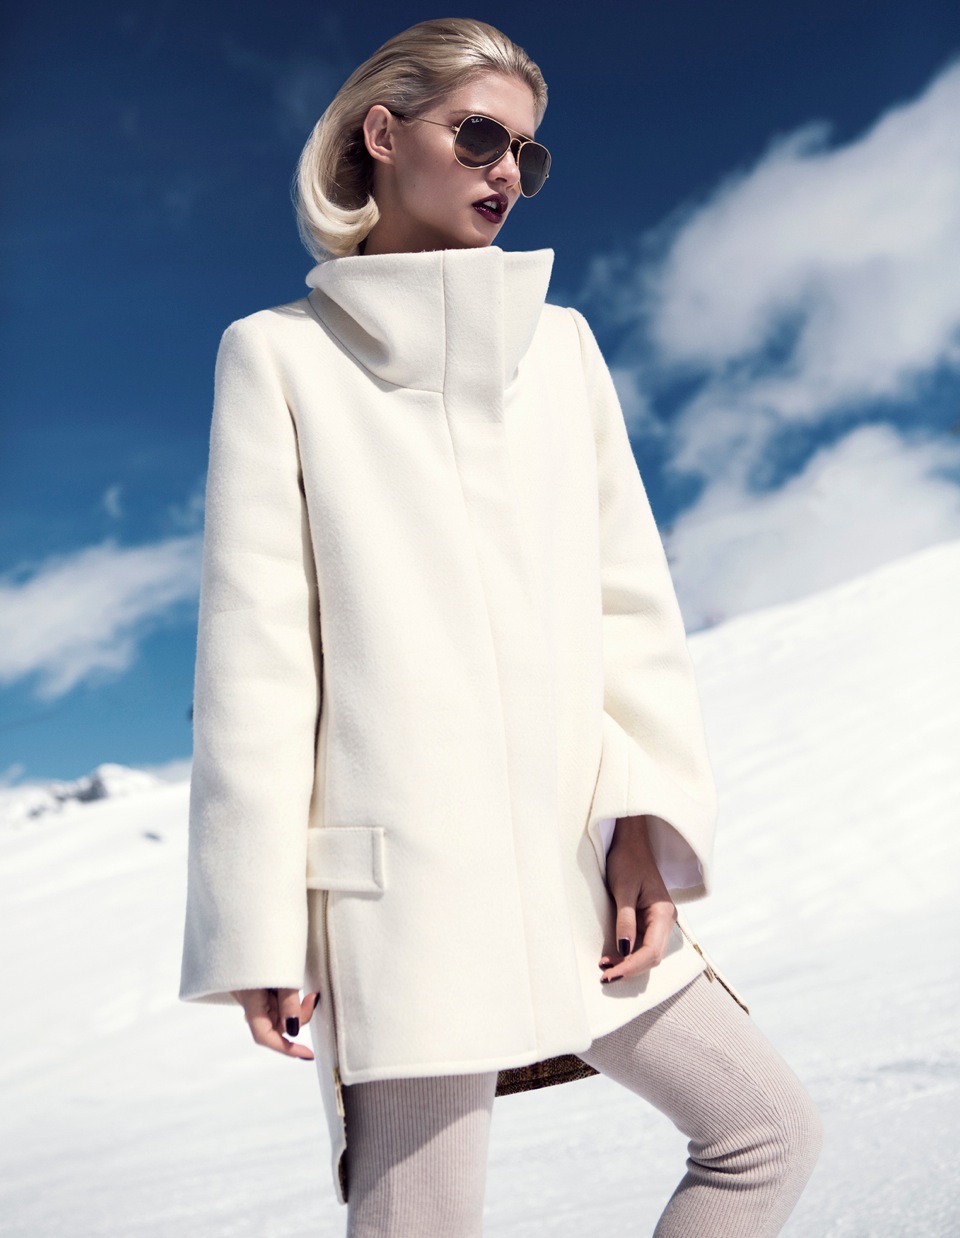 Martina Dimitrova Stuns In The Snow For Dv Mode By Fredrik Wannerstedt Fashion Gone Rogue